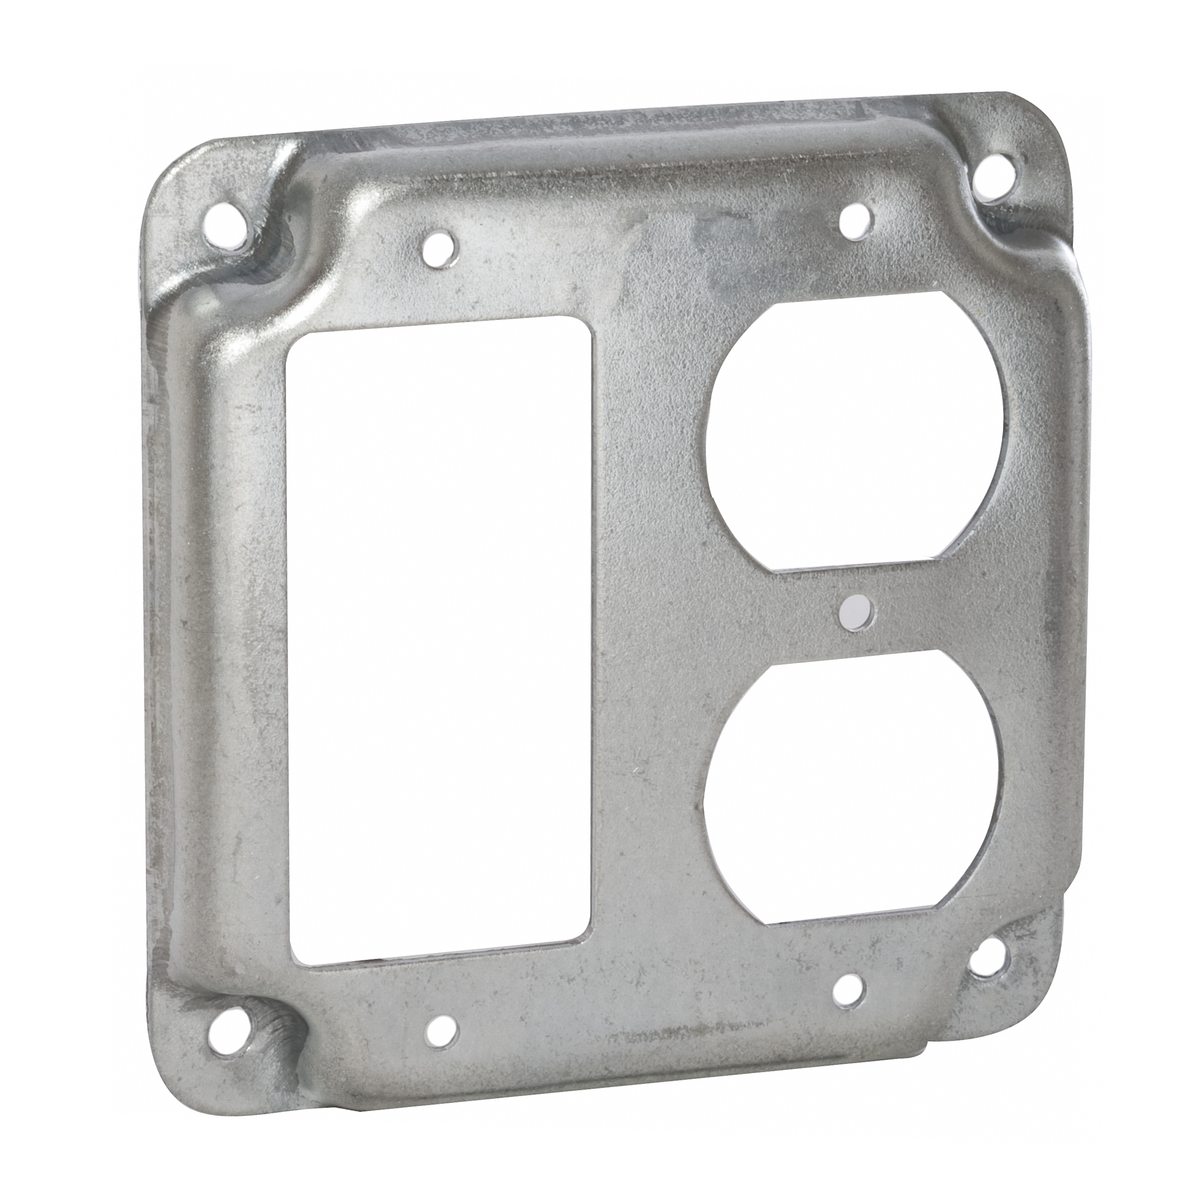 4 In. Square Exposed Work Covers - Raised 1/2 In., 1 GFCI and 1 DuplexReceptacle